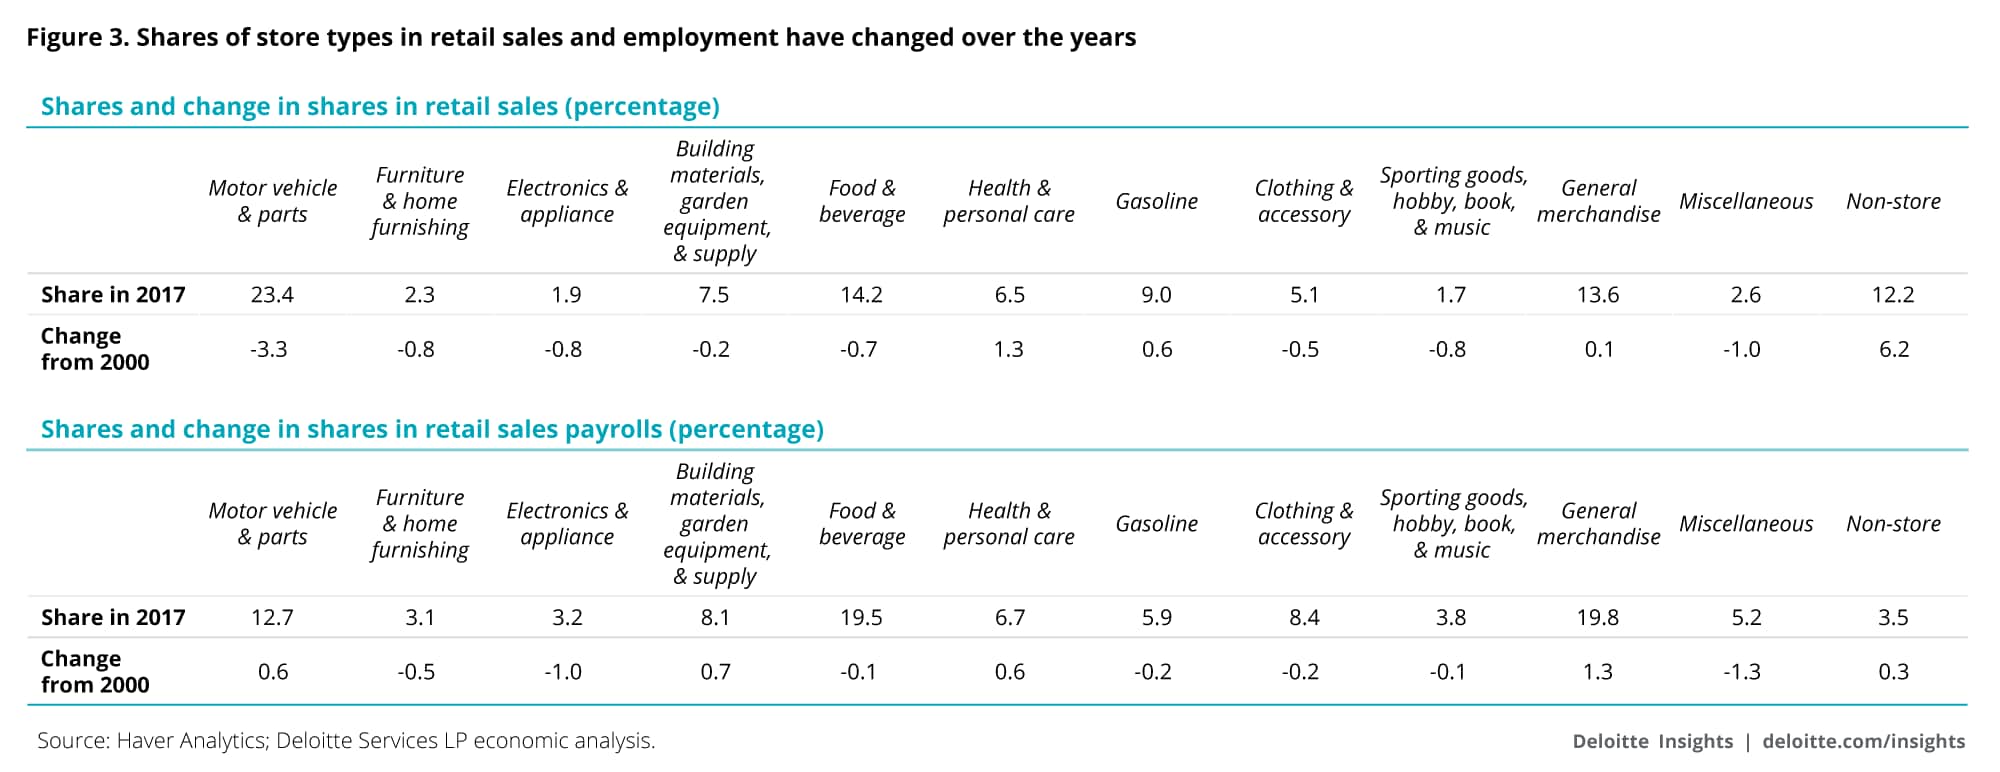 Shares of store types in retail sales and employment have changed over the years